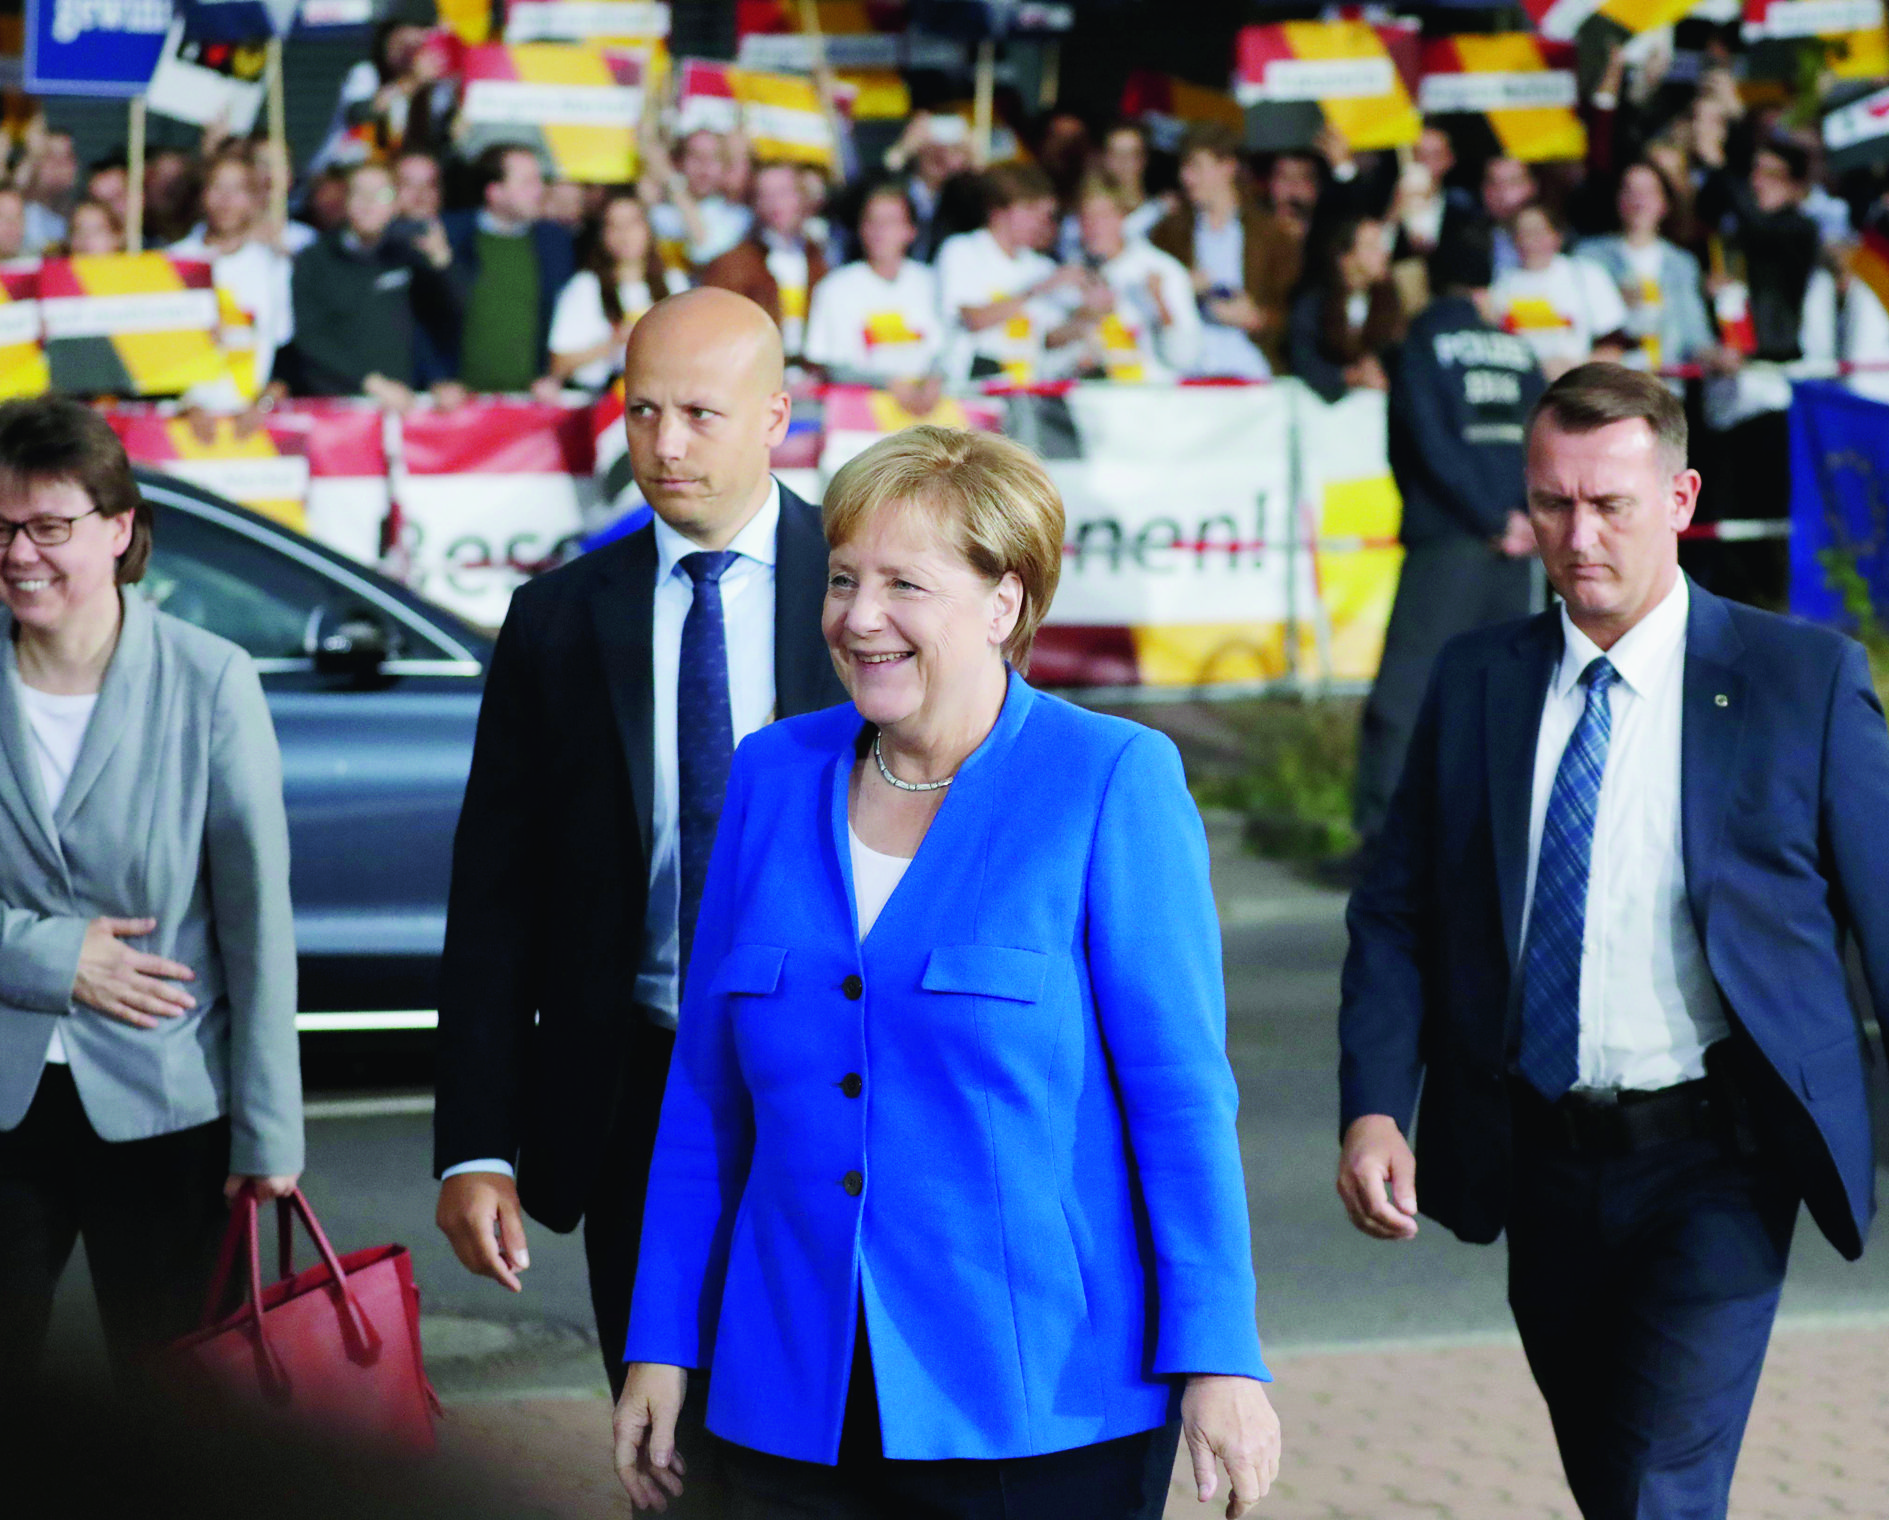 epa06181584 German Chancellor Angela Merkel (2-R) smiles next to her office manager Beate Baumann (L), during her arrival to the TV debate with Martin Schulz, Chancellor candidate and leader of the Social Democartic Party (SPD), in front of the TV studio in Berlin, Germany, 03 September 2017. German federal elections will be held on 24 September 2017.  EPA/CARSTEN KOALL GERMANY ELECTIONS MERKEL SCHULTZ TV DEBATE